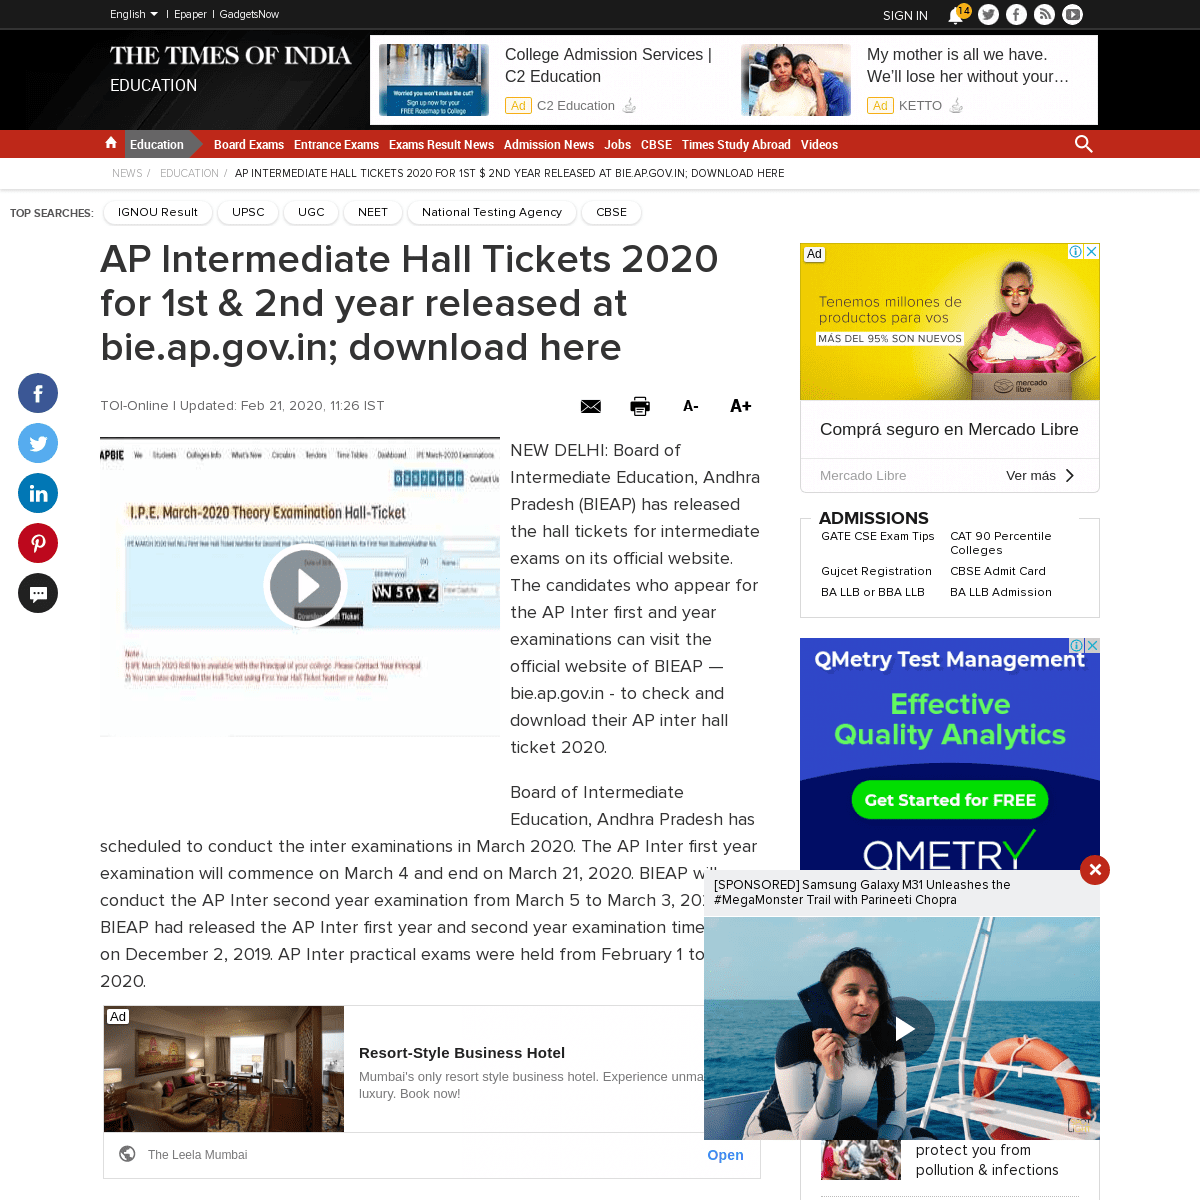 A complete backup of timesofindia.indiatimes.com/home/education/news/ap-intermediate-hall-tickets-2020-for-1st-year-2nd-year-rel